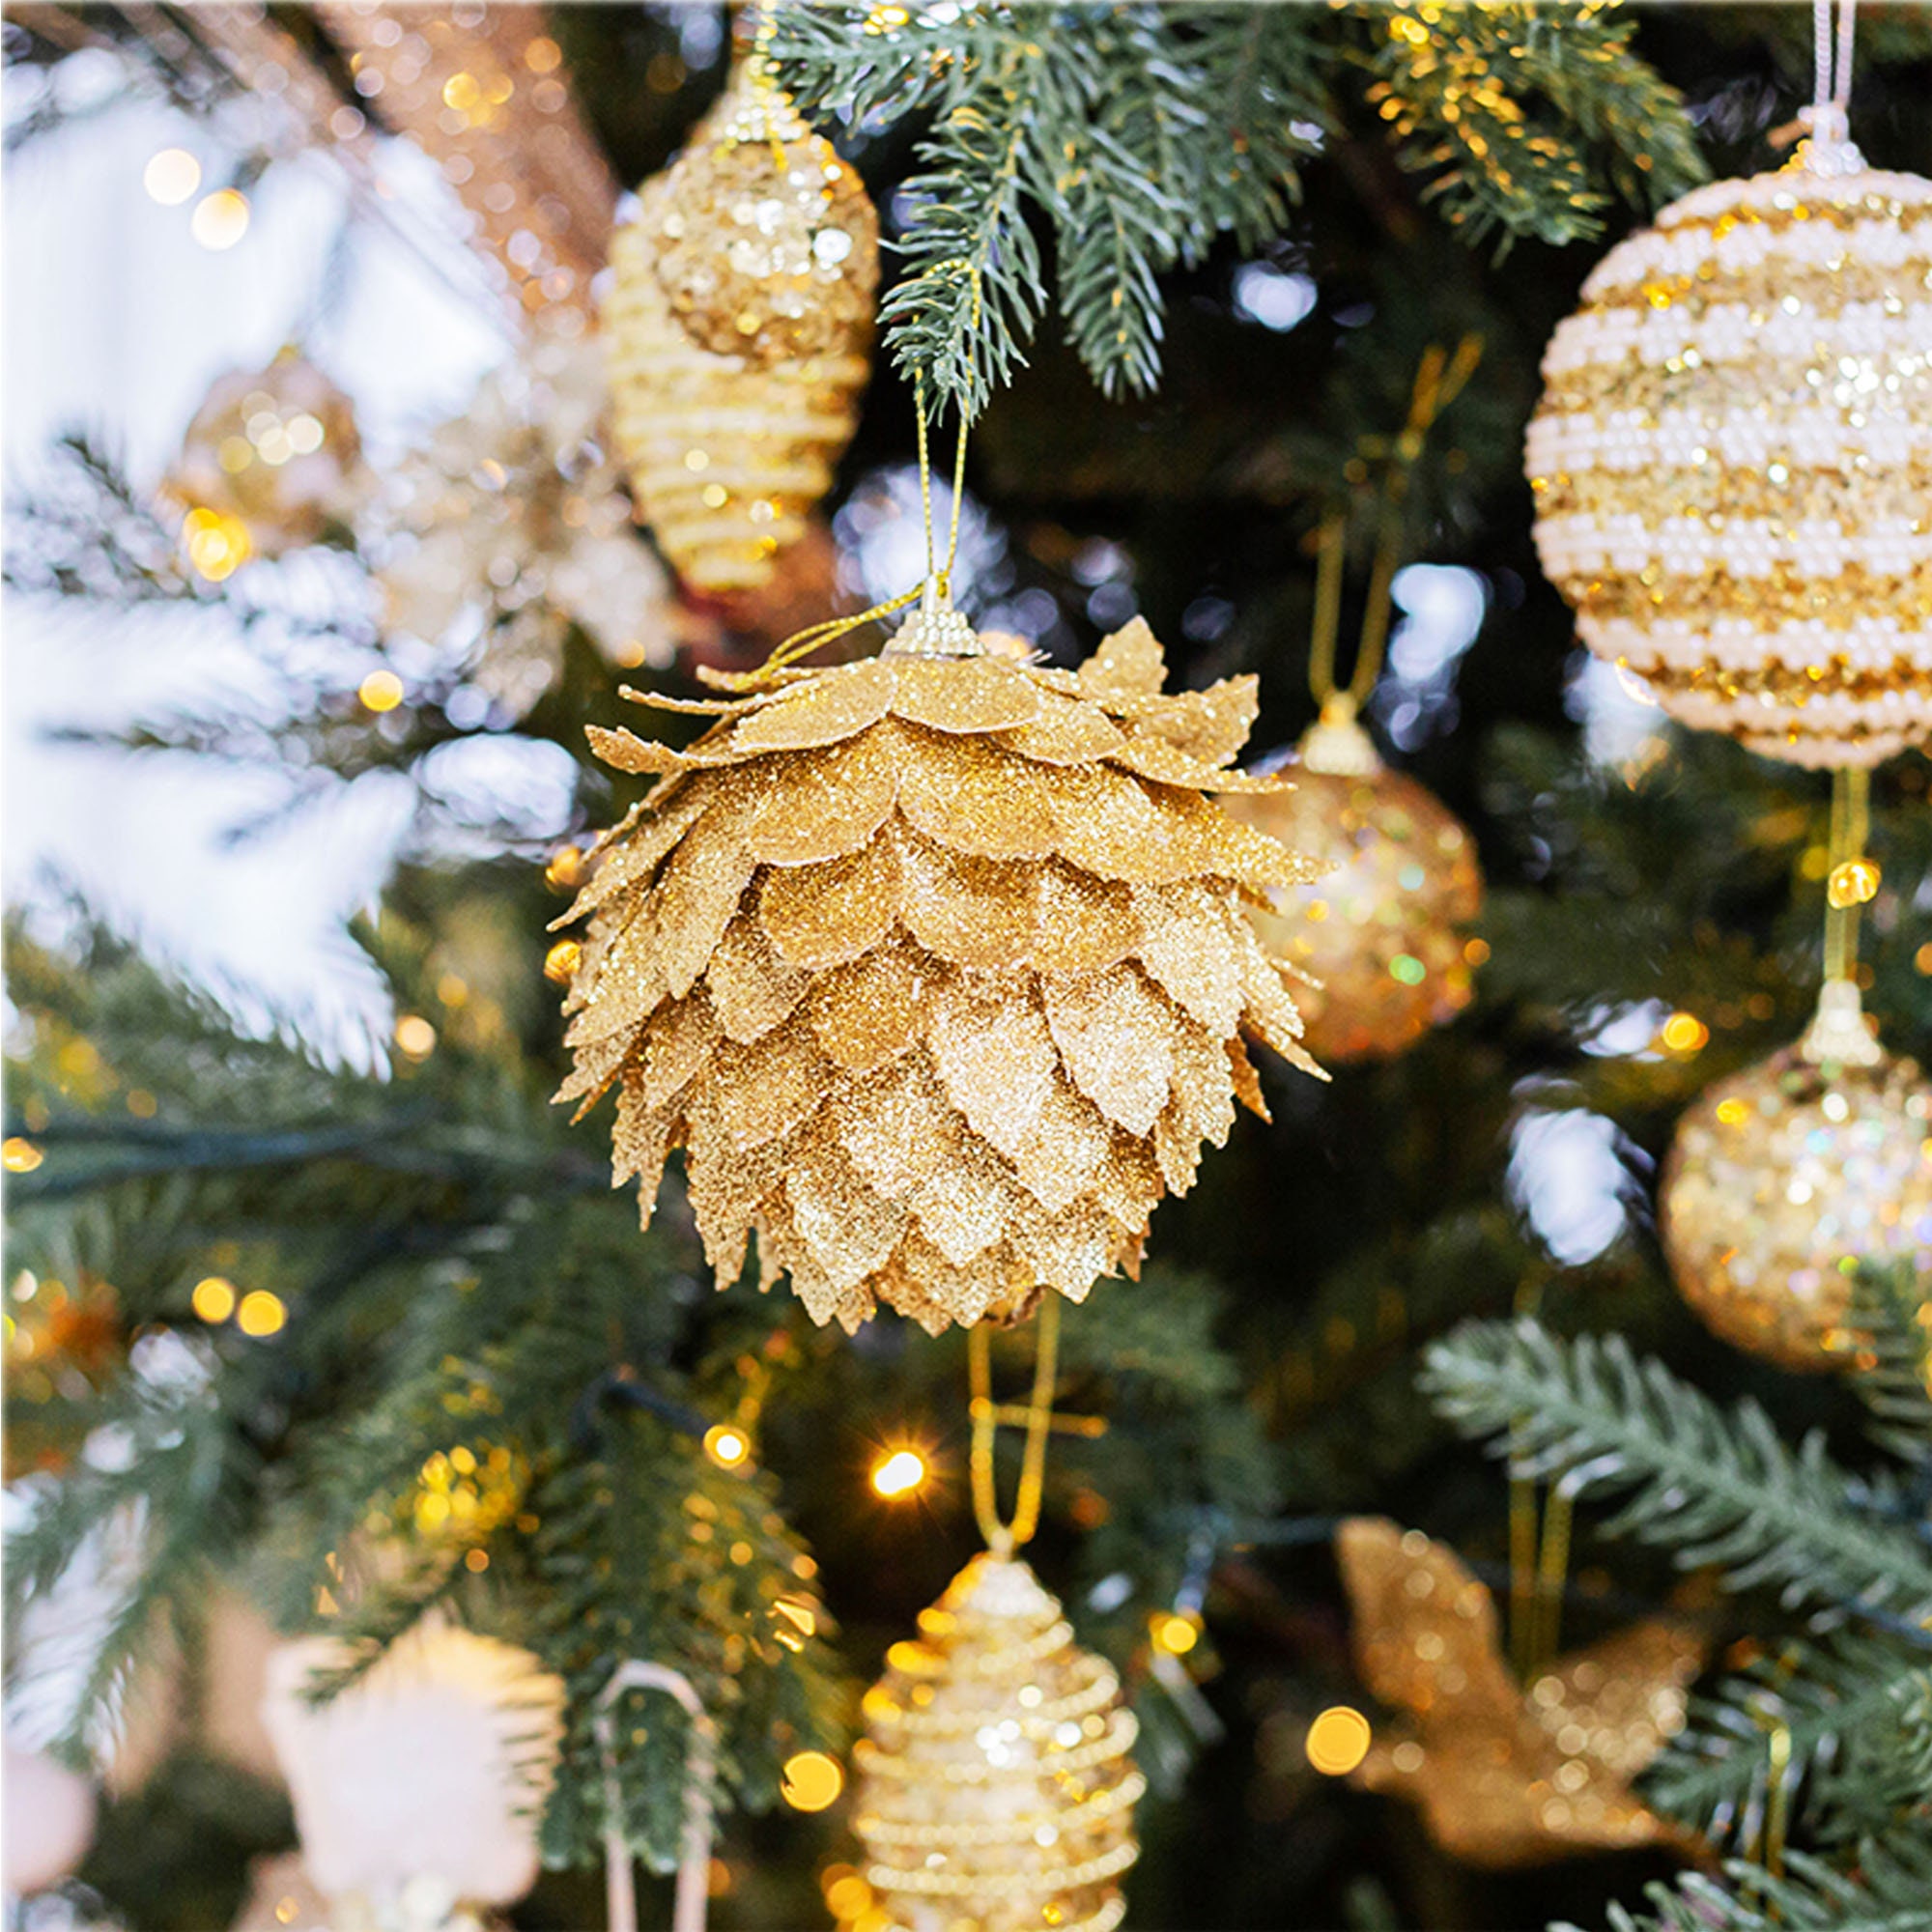  Feather Pine Cone Christmas Ornament - 6 Gold Glitter Xmas  Holiday Fall Decoration : Home & Kitchen